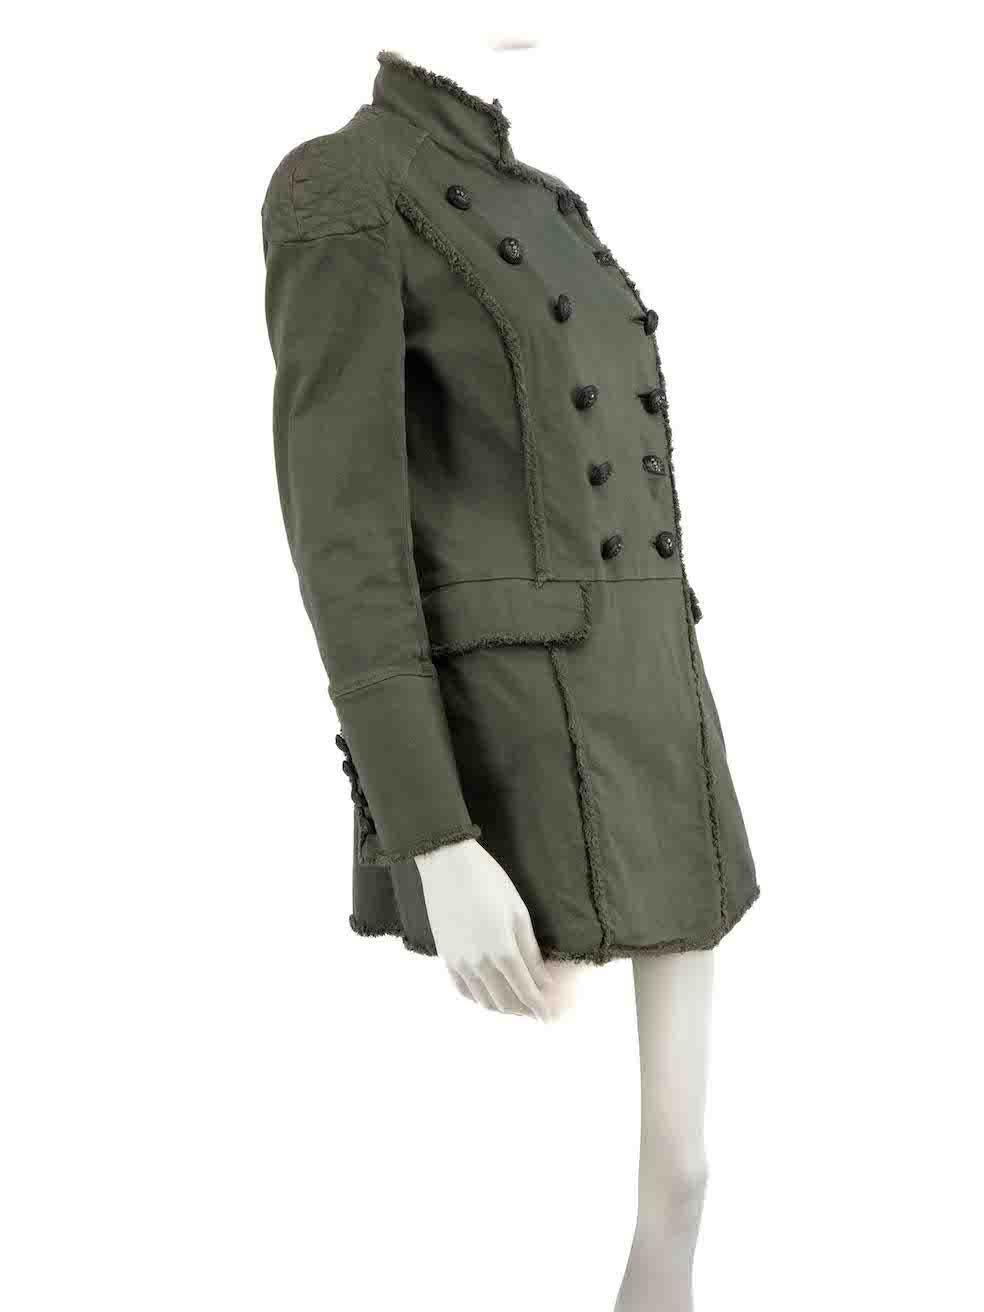 CONDITION is Very good. Hardly any visible wear to coat is evident on this used Pierre Balmain designer resale item.
 
 Details
 Green
 Cotton
 Jacket
 Double breasted
 Button up fastening
 Shoulder pads
 Raw edge details
 Buttoned cuffs
 2x Side